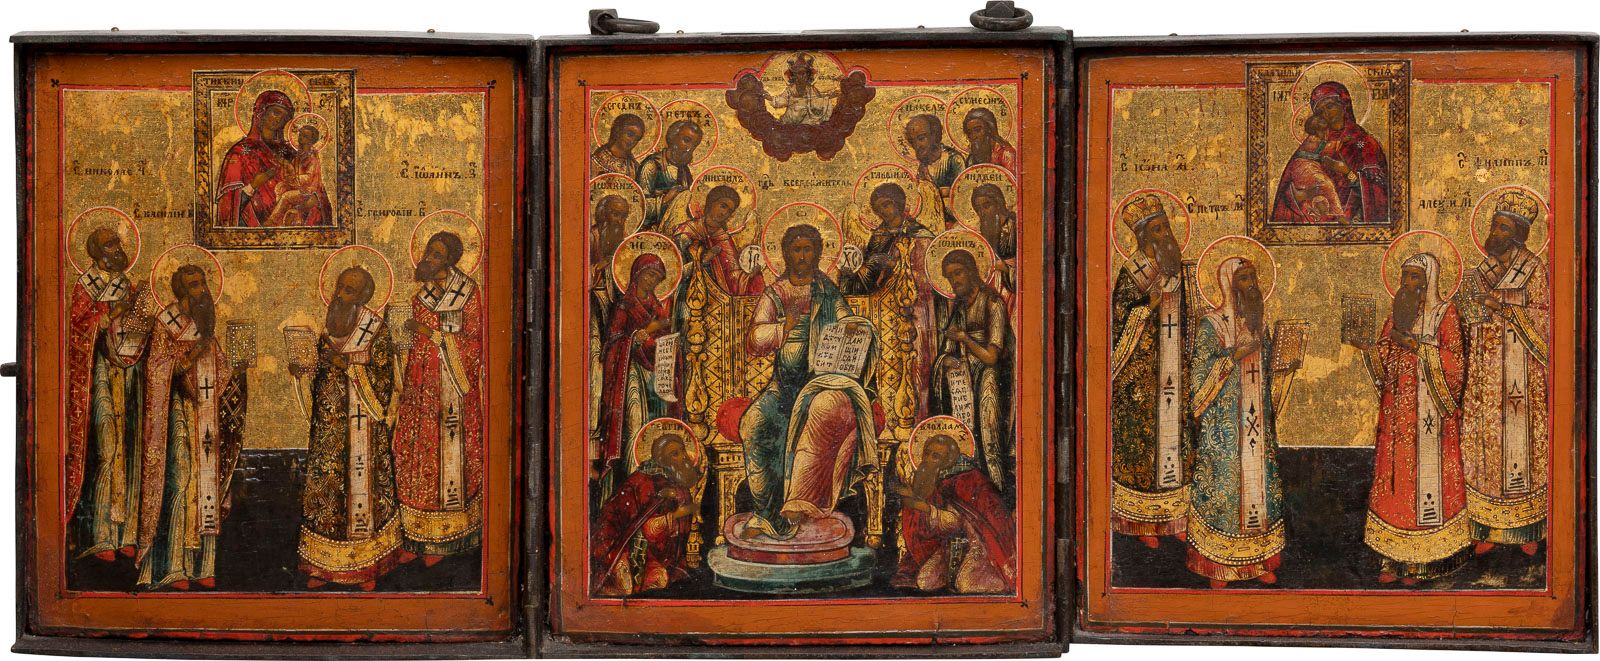 A LARGE TRIPTYCH SHOWING THE EXTENDED DEISIS, IMAGES OF THE UN GRANDE TRIPTICO C&hellip;